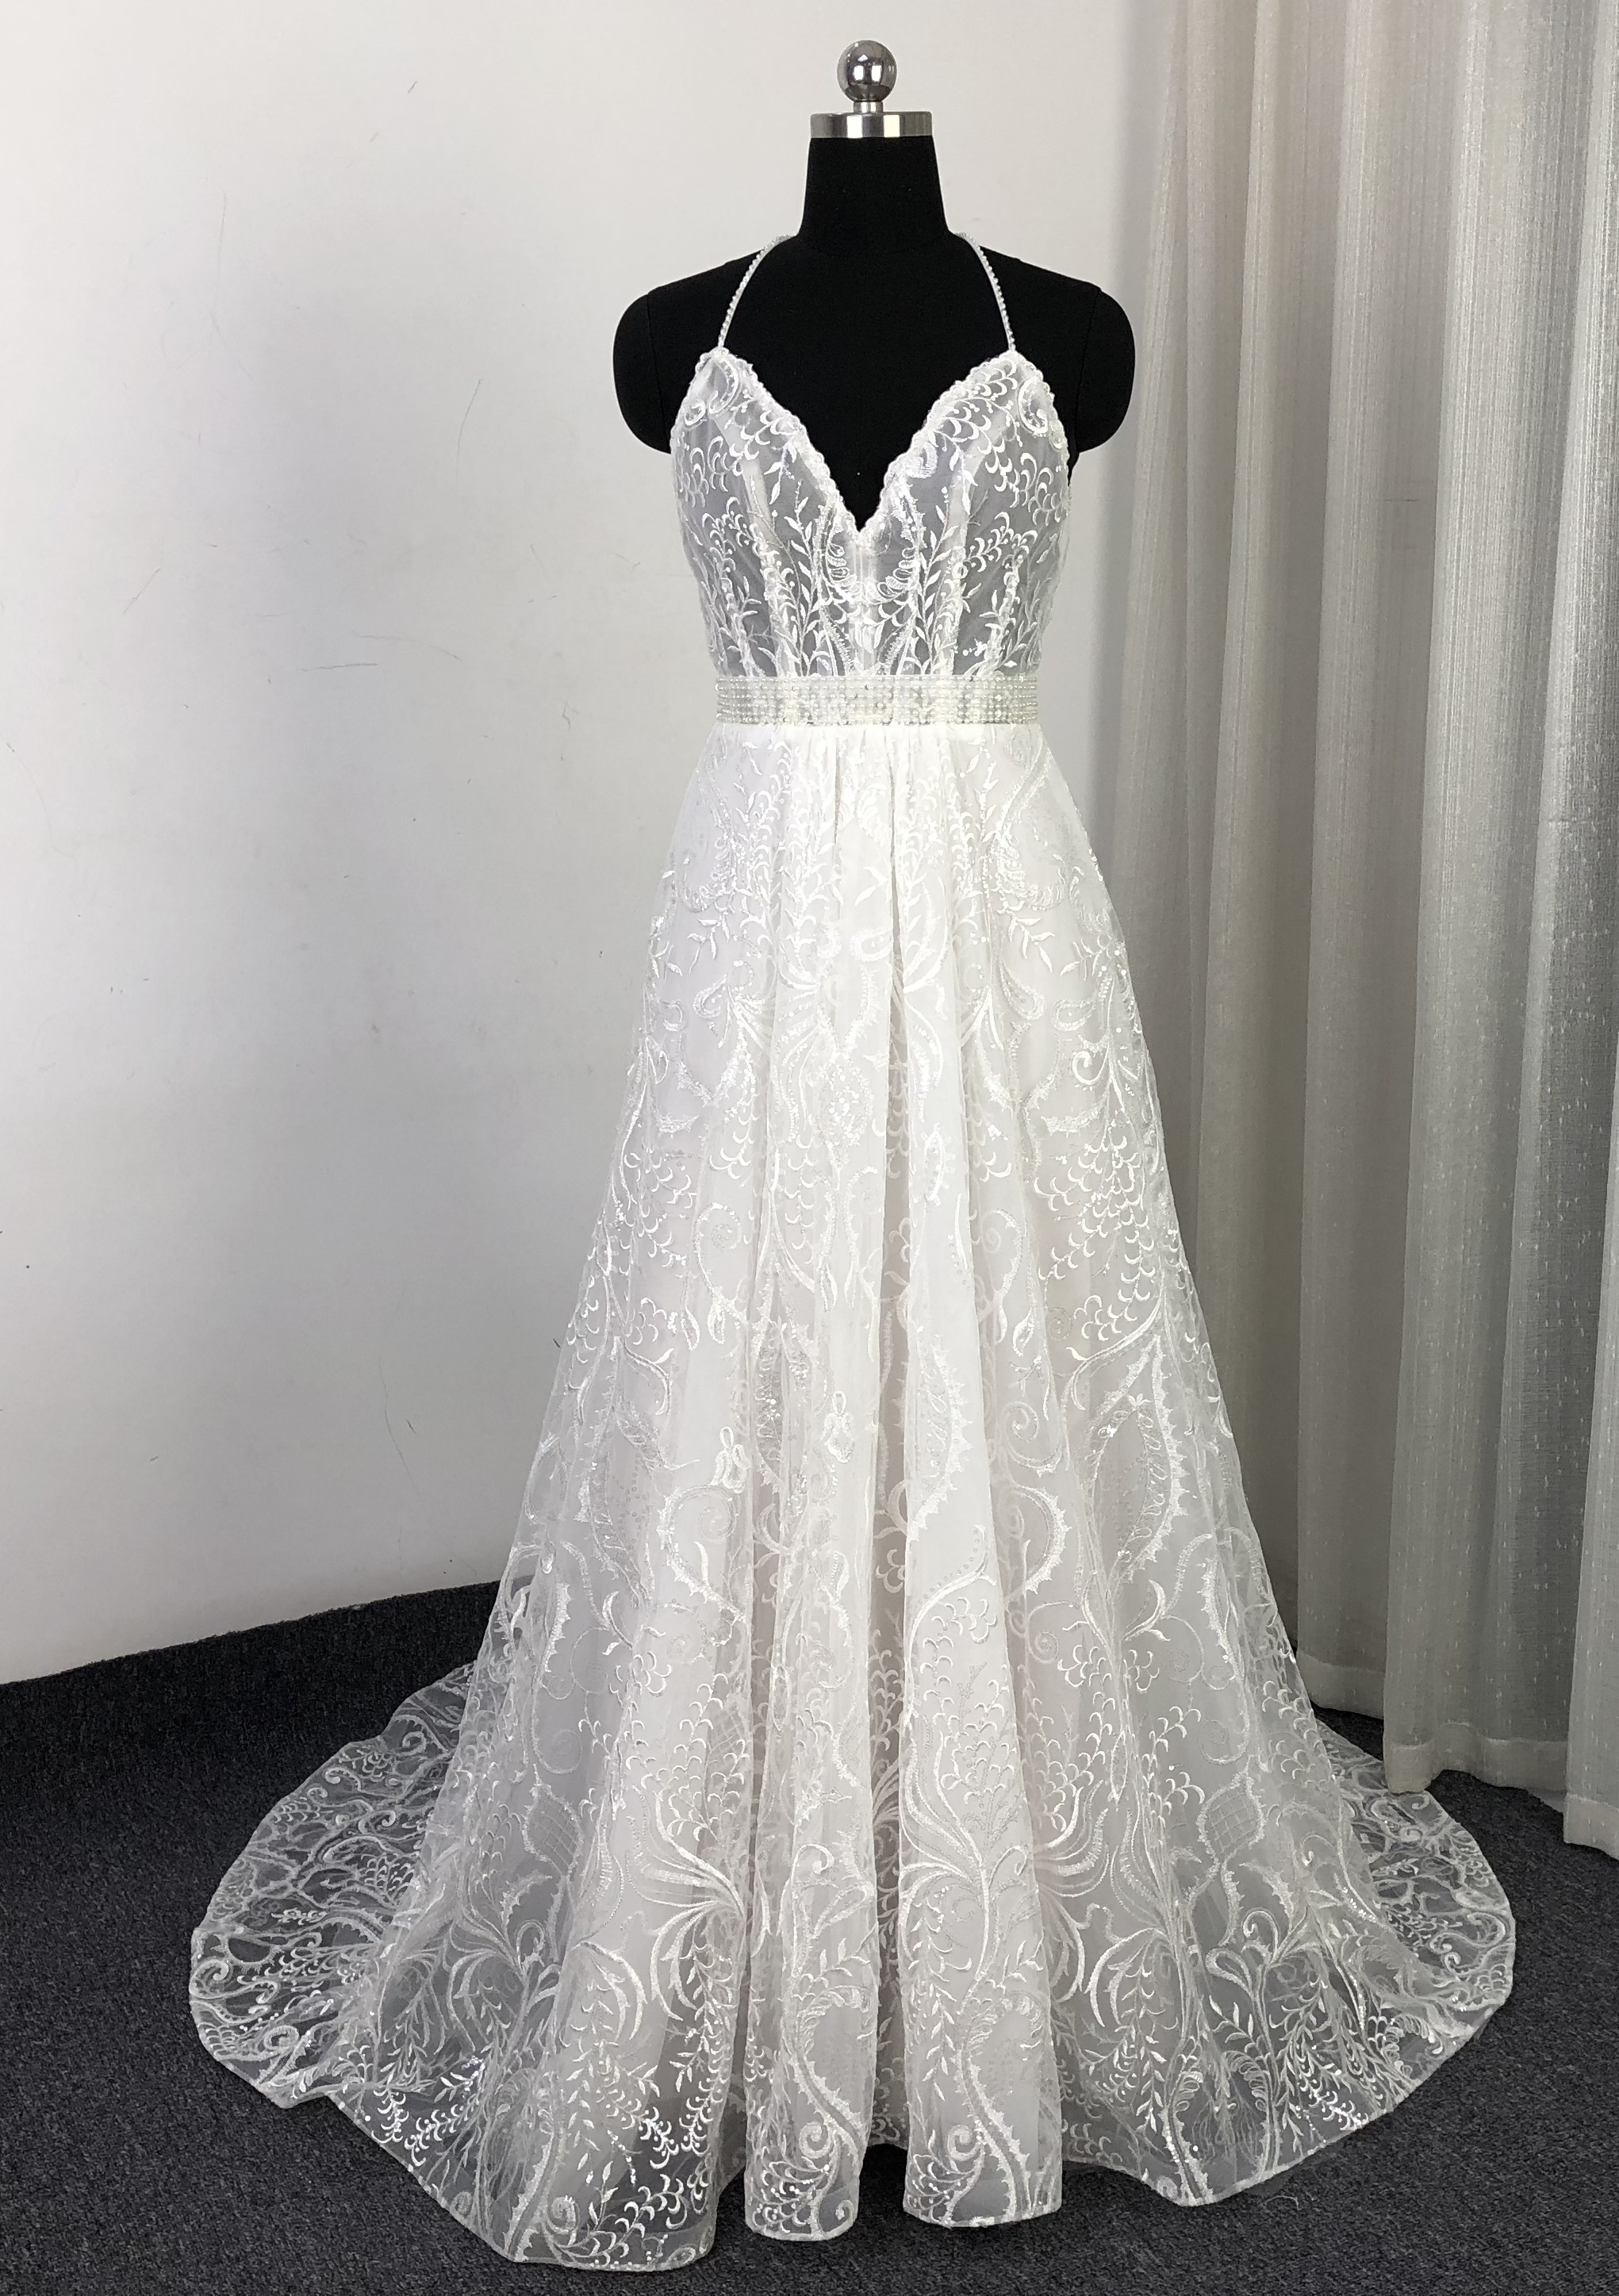 Sexy Spaghetti Strap Sweetheart Sheer Lace Top Wedding gown.